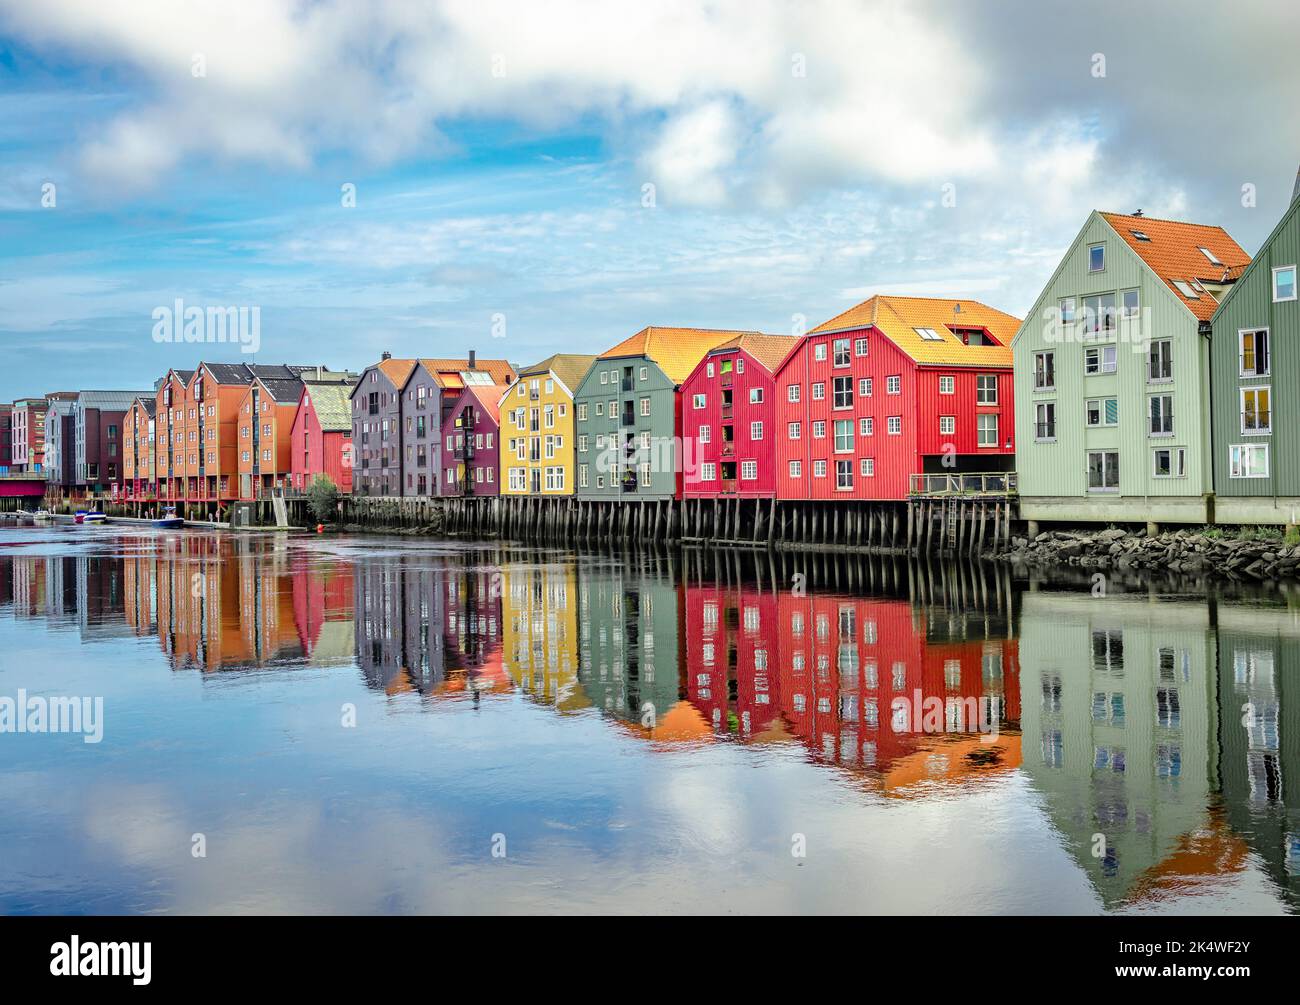 The inner city's iconic waterside warehouses by the river Nidelven , one of the most distinctive historical vernacular building types in Trondheim, No Stock Photo